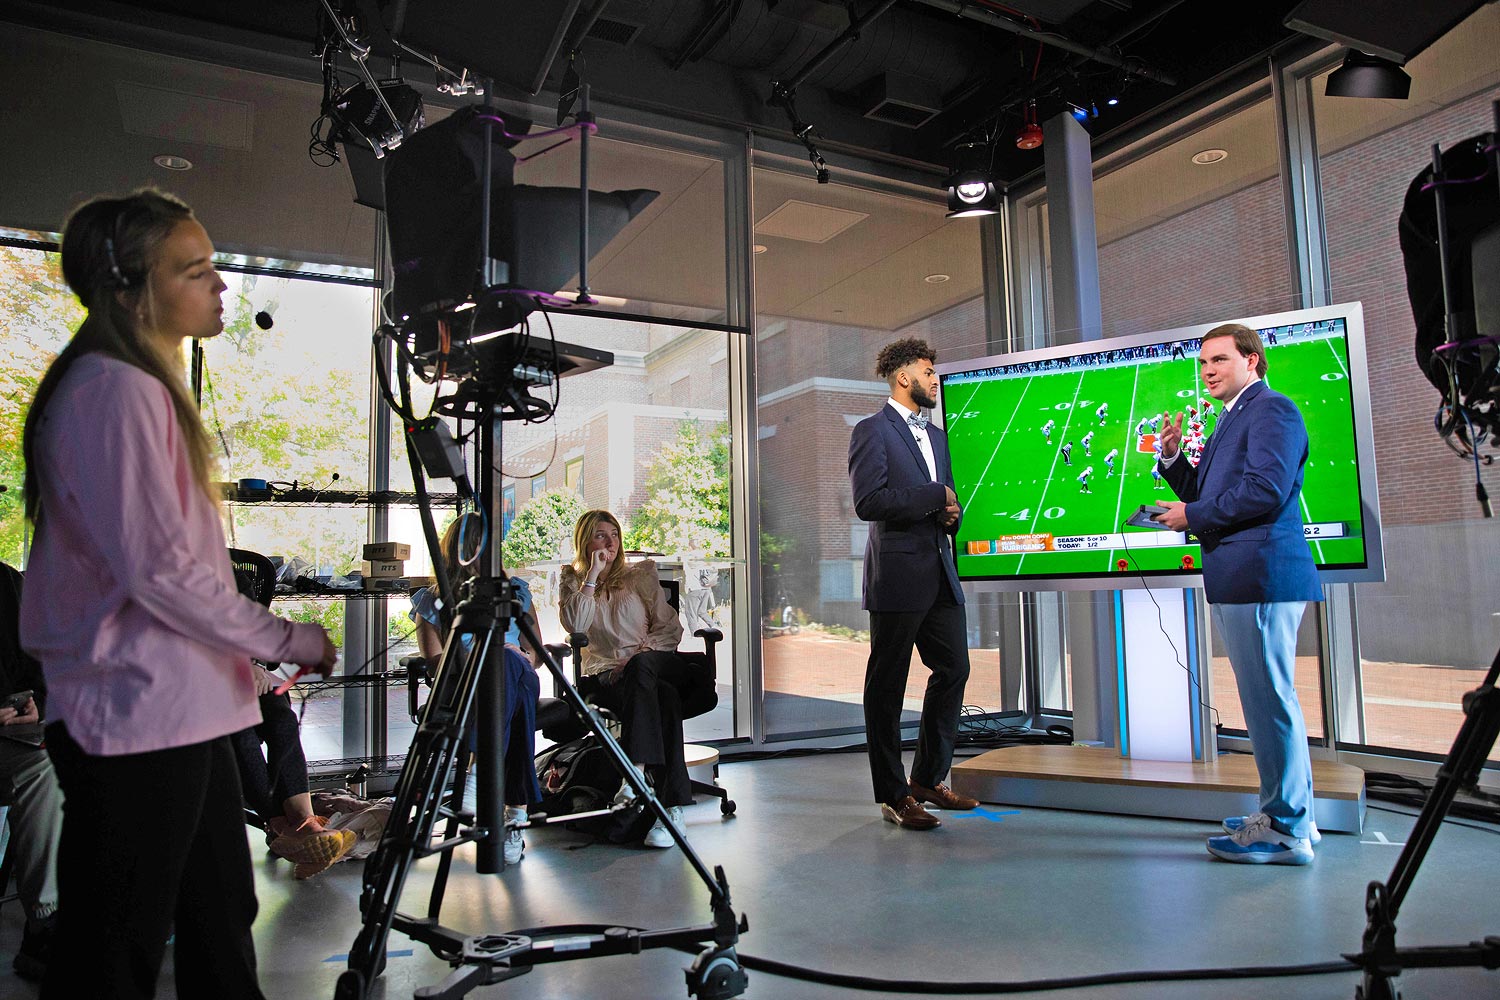 Sports Xtra program host reviews a football play with one of UNC's players in the James F. Goodman broadcast studio.